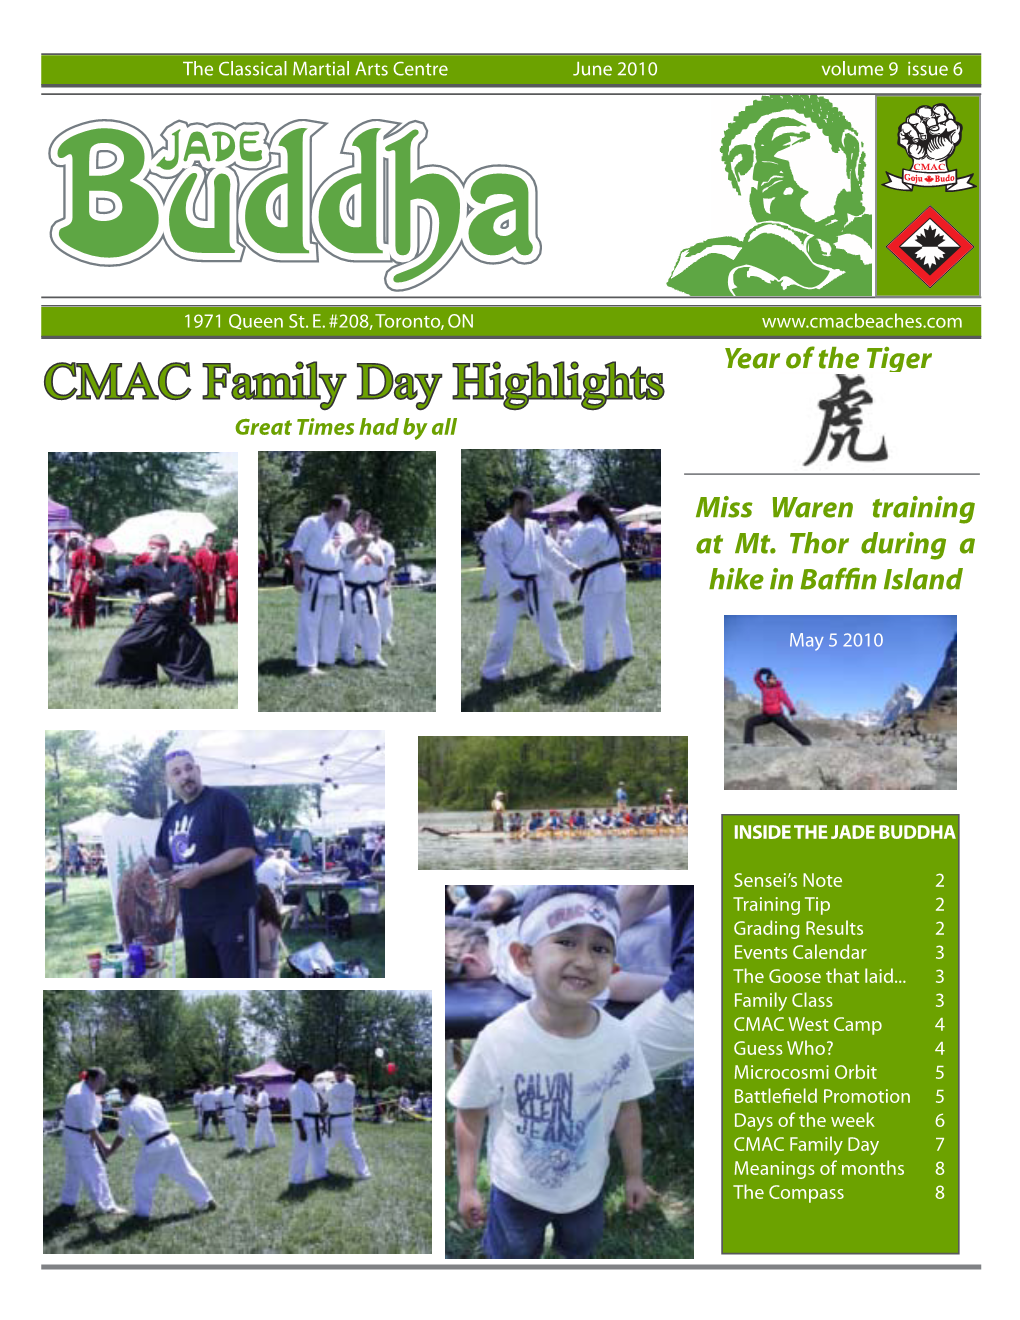 CMAC Family Day Highlights Year of the Tiger Great Times Had by All